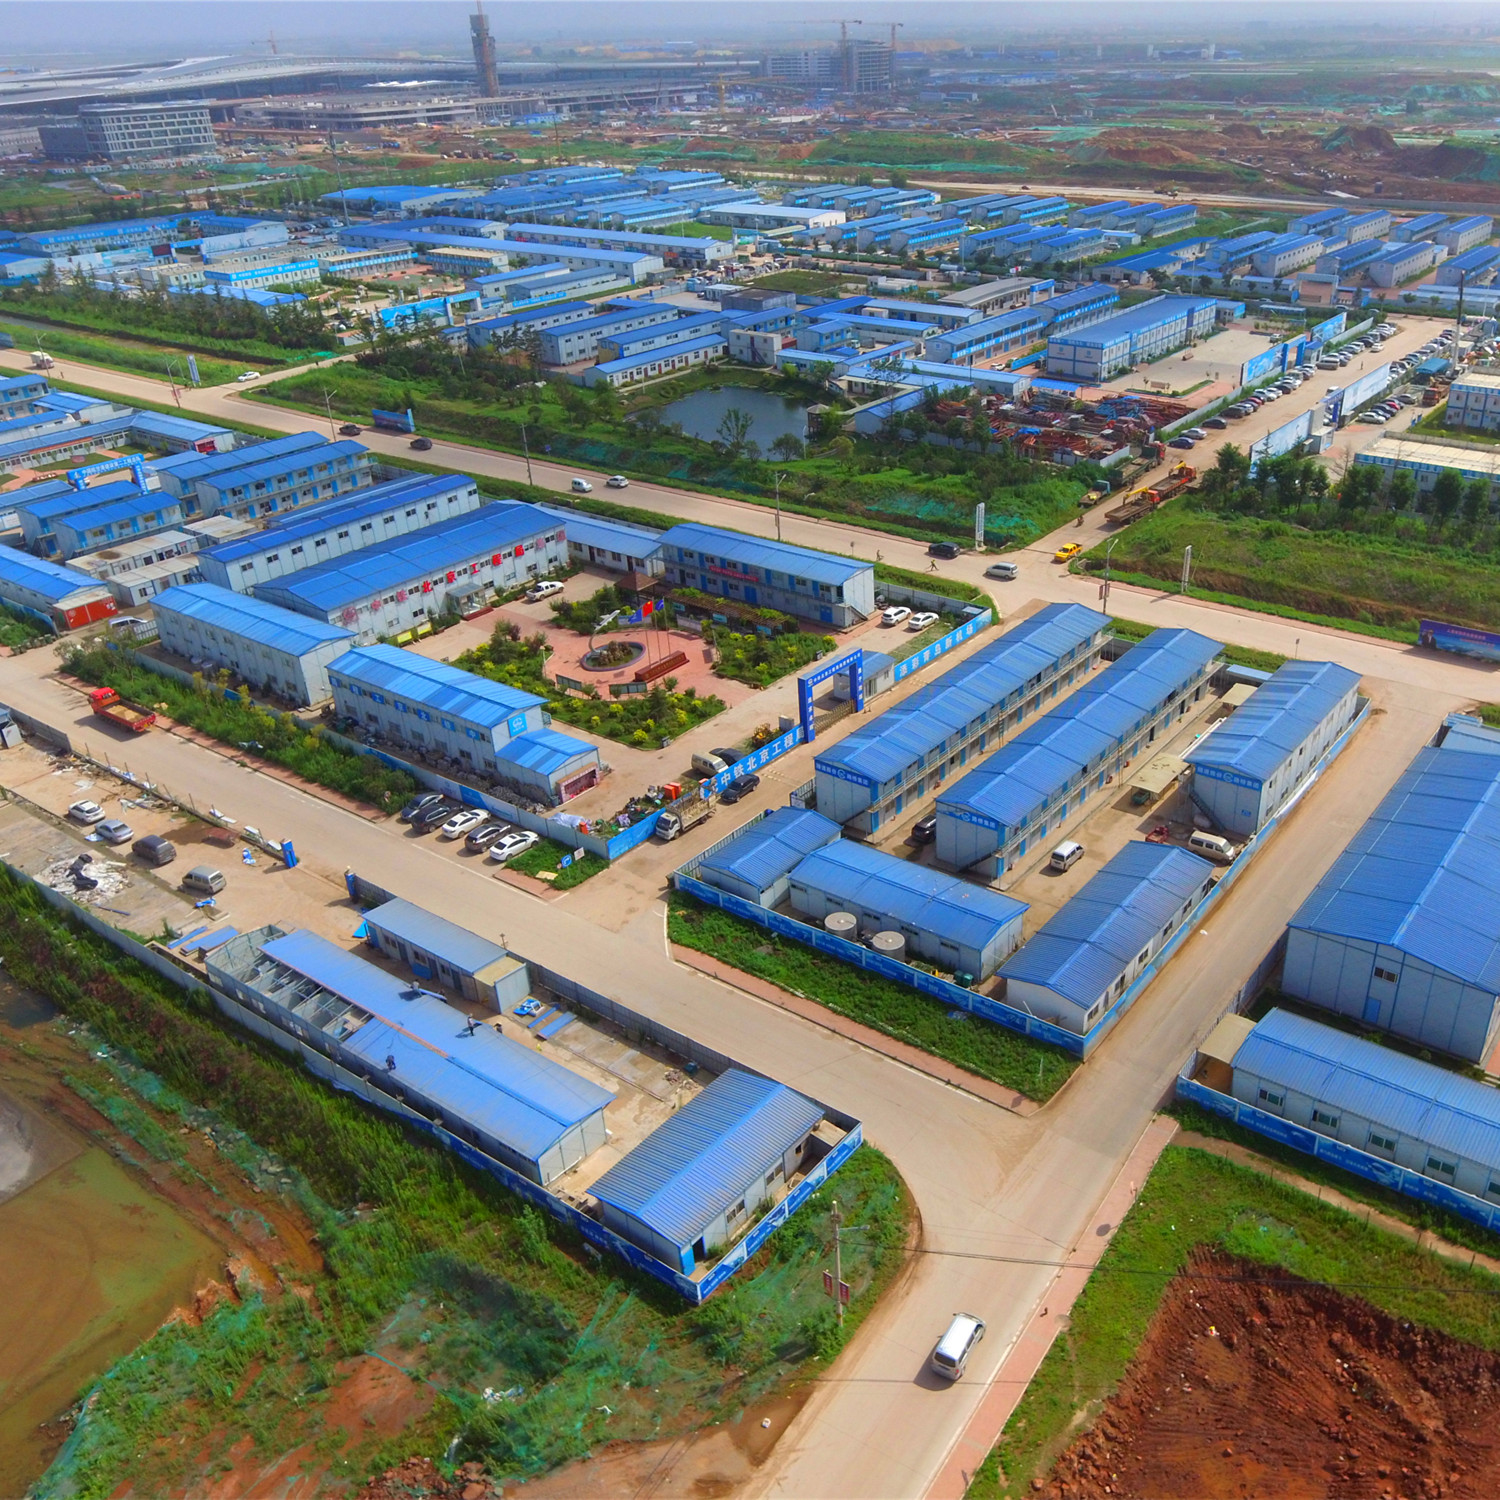 China Products/Suppliers. Steel Structure Prefab House, Labor Camp for Construction Building and Steel Structure